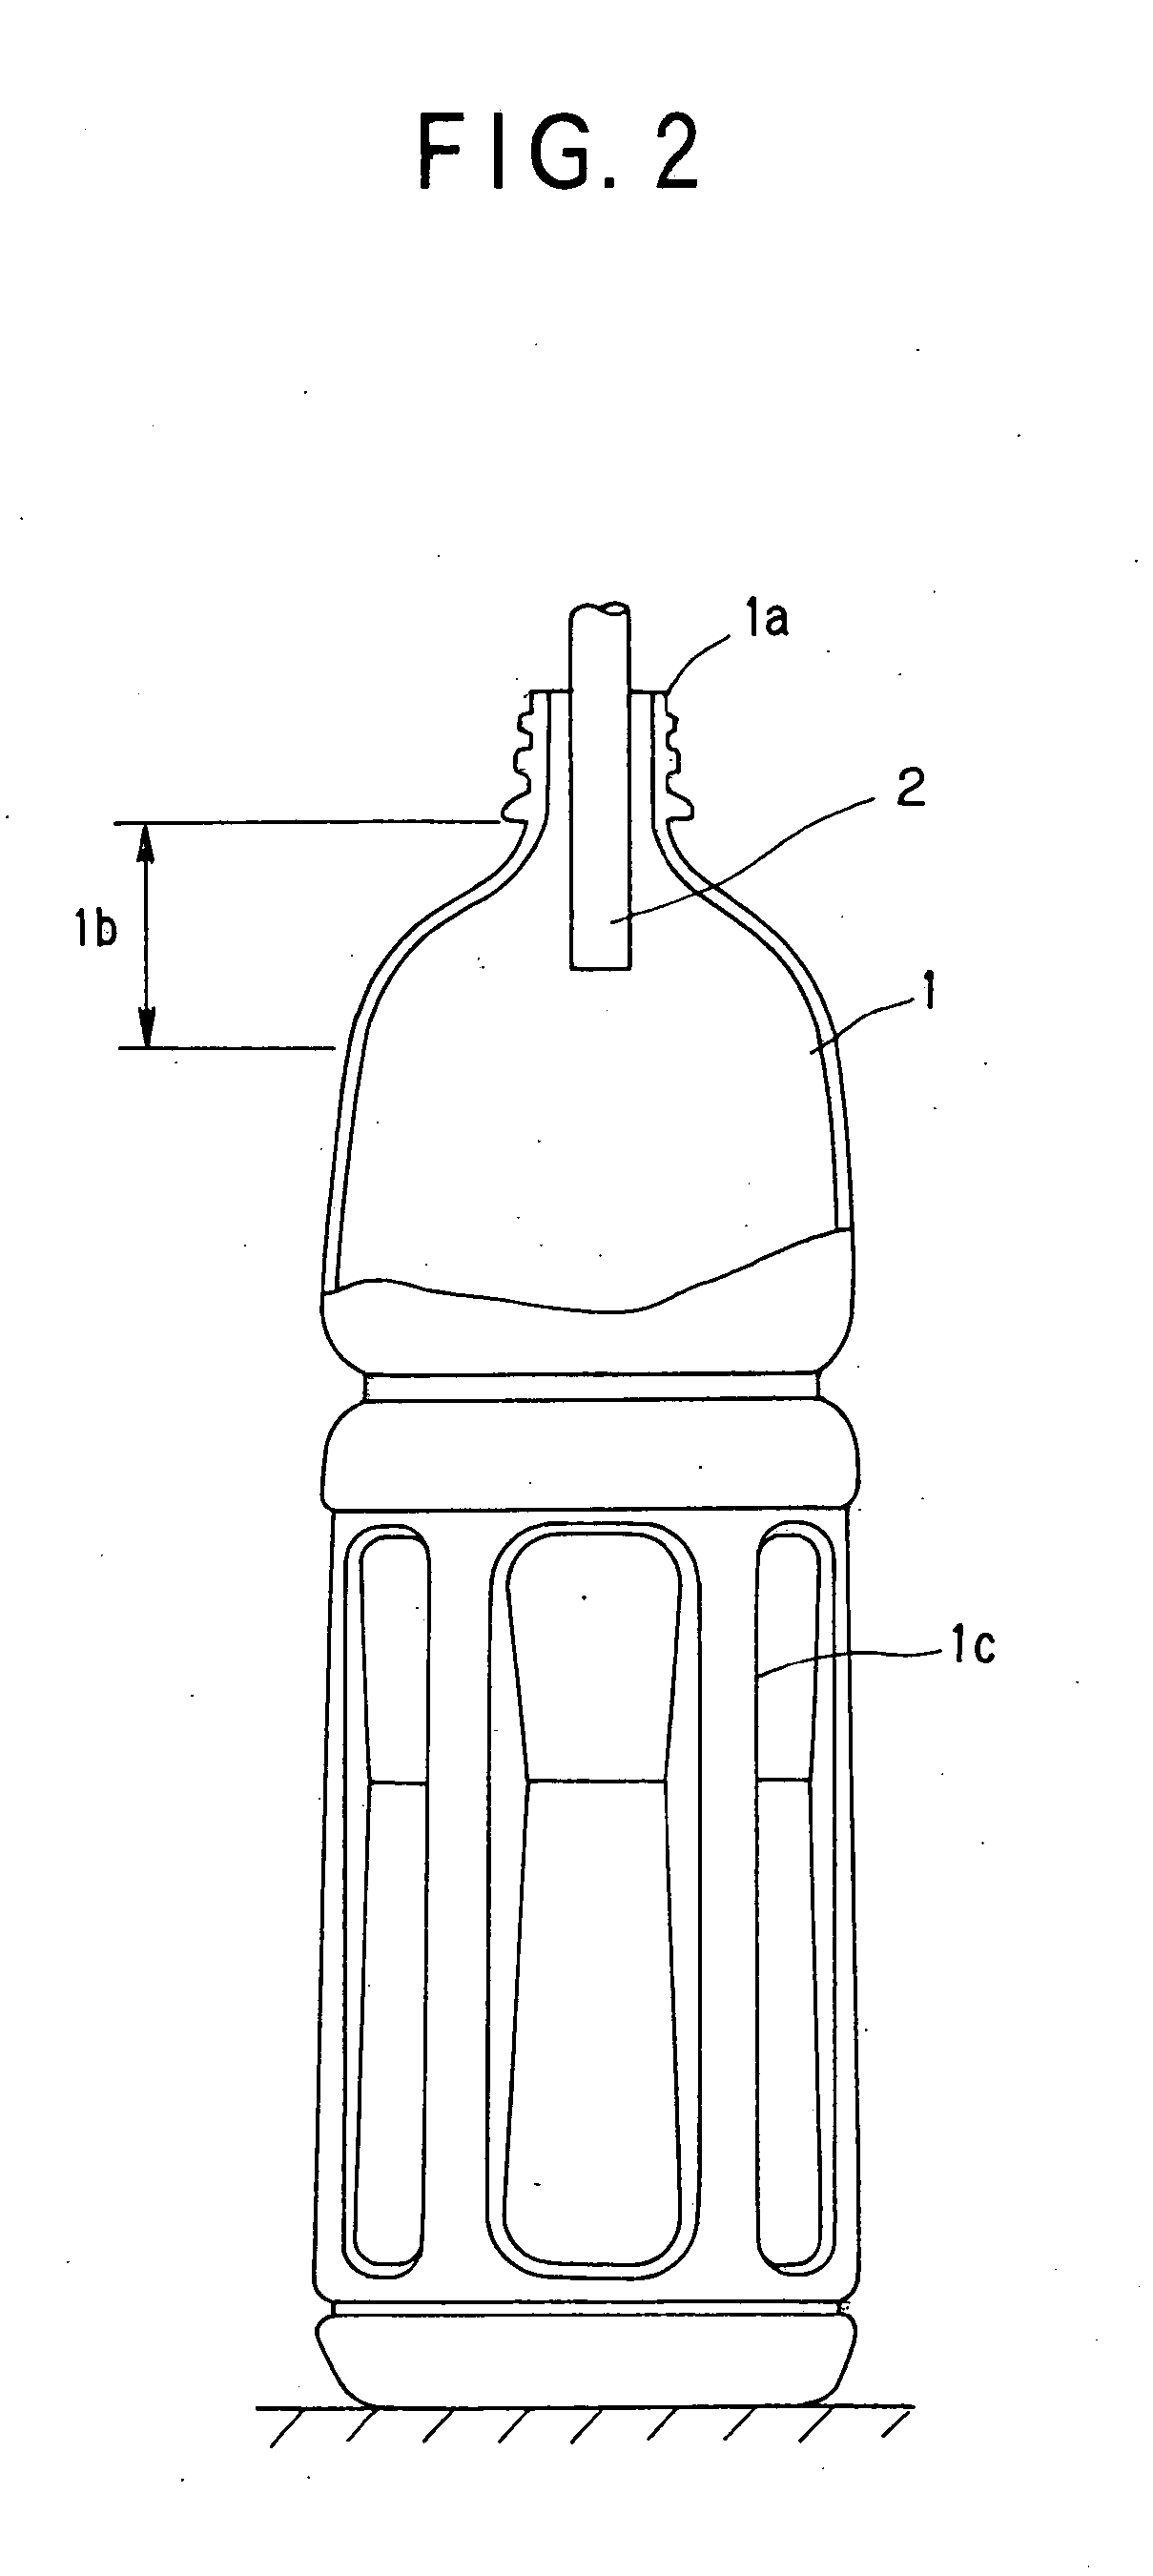 Method of sterilization for container, apparatus using therefor, and heat treatment for container